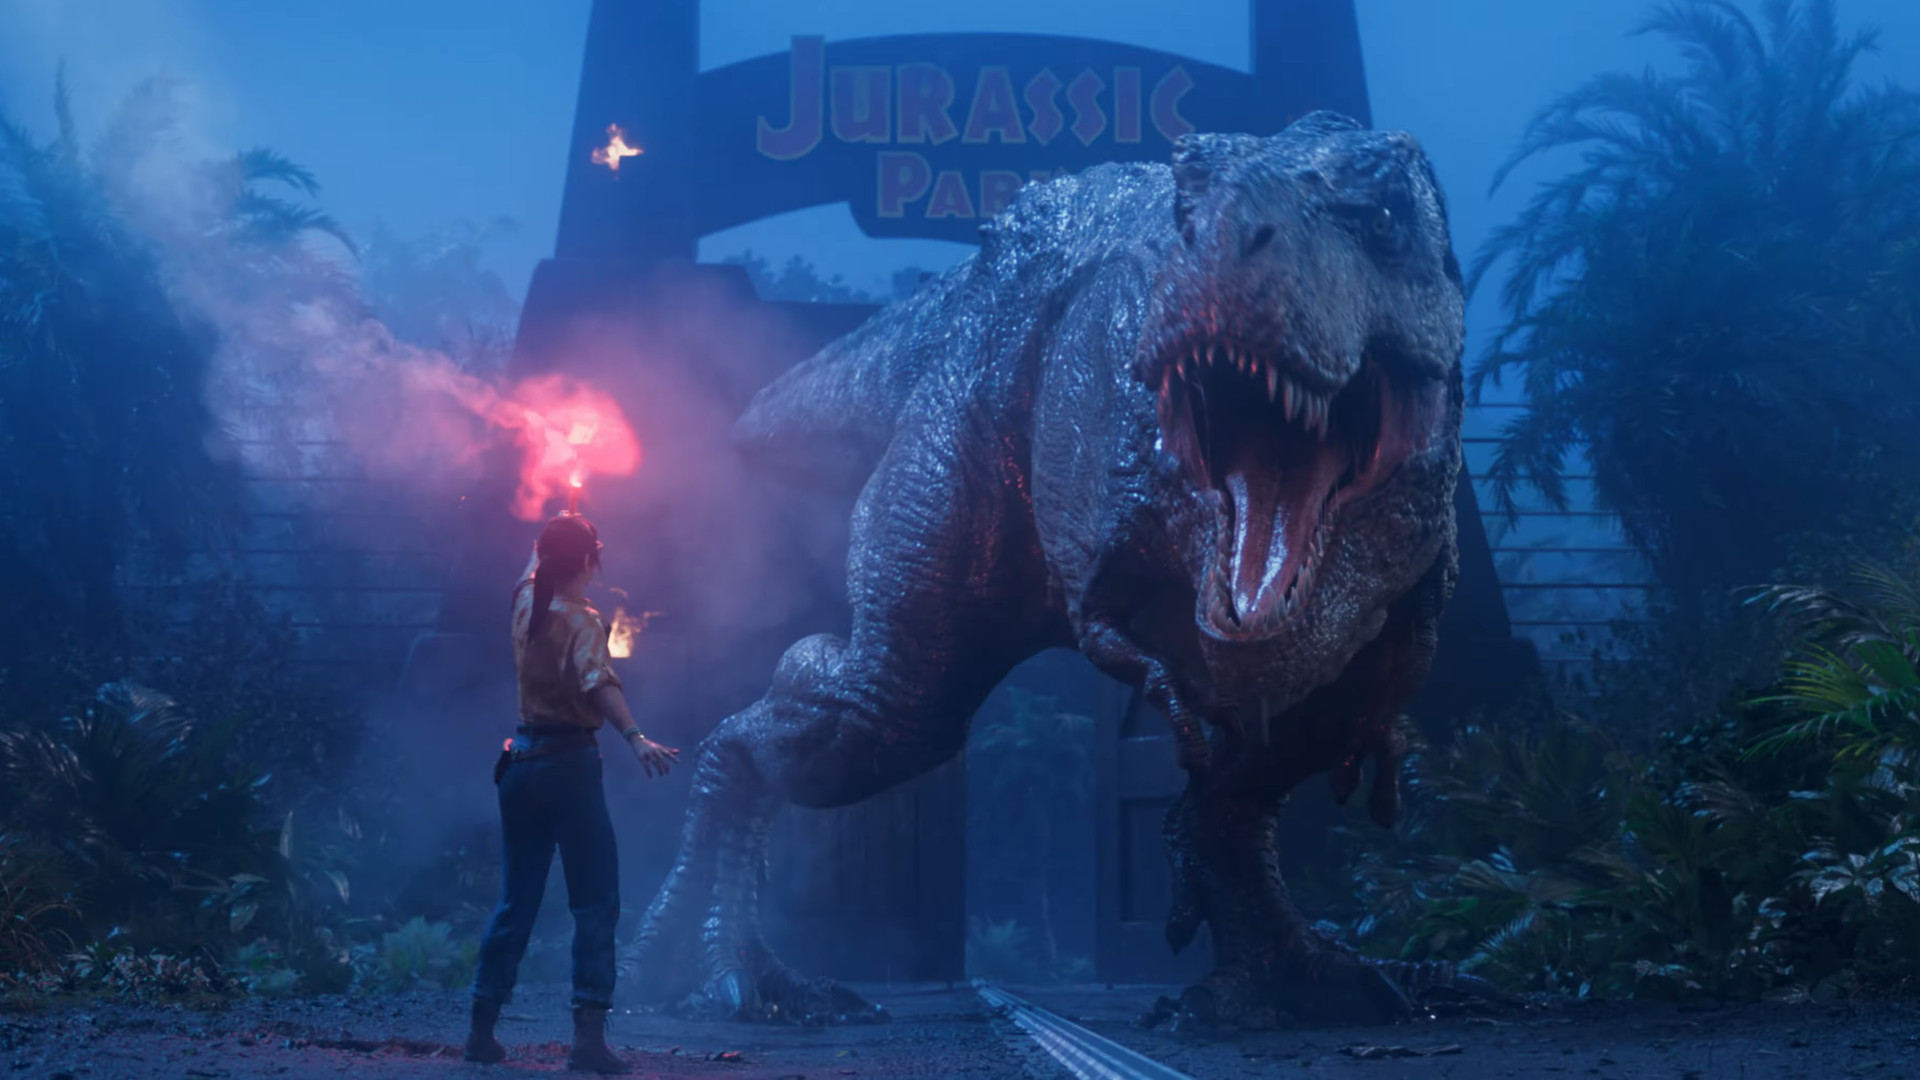 Jurassic Park: Survival looks like the game I've been dreaming of